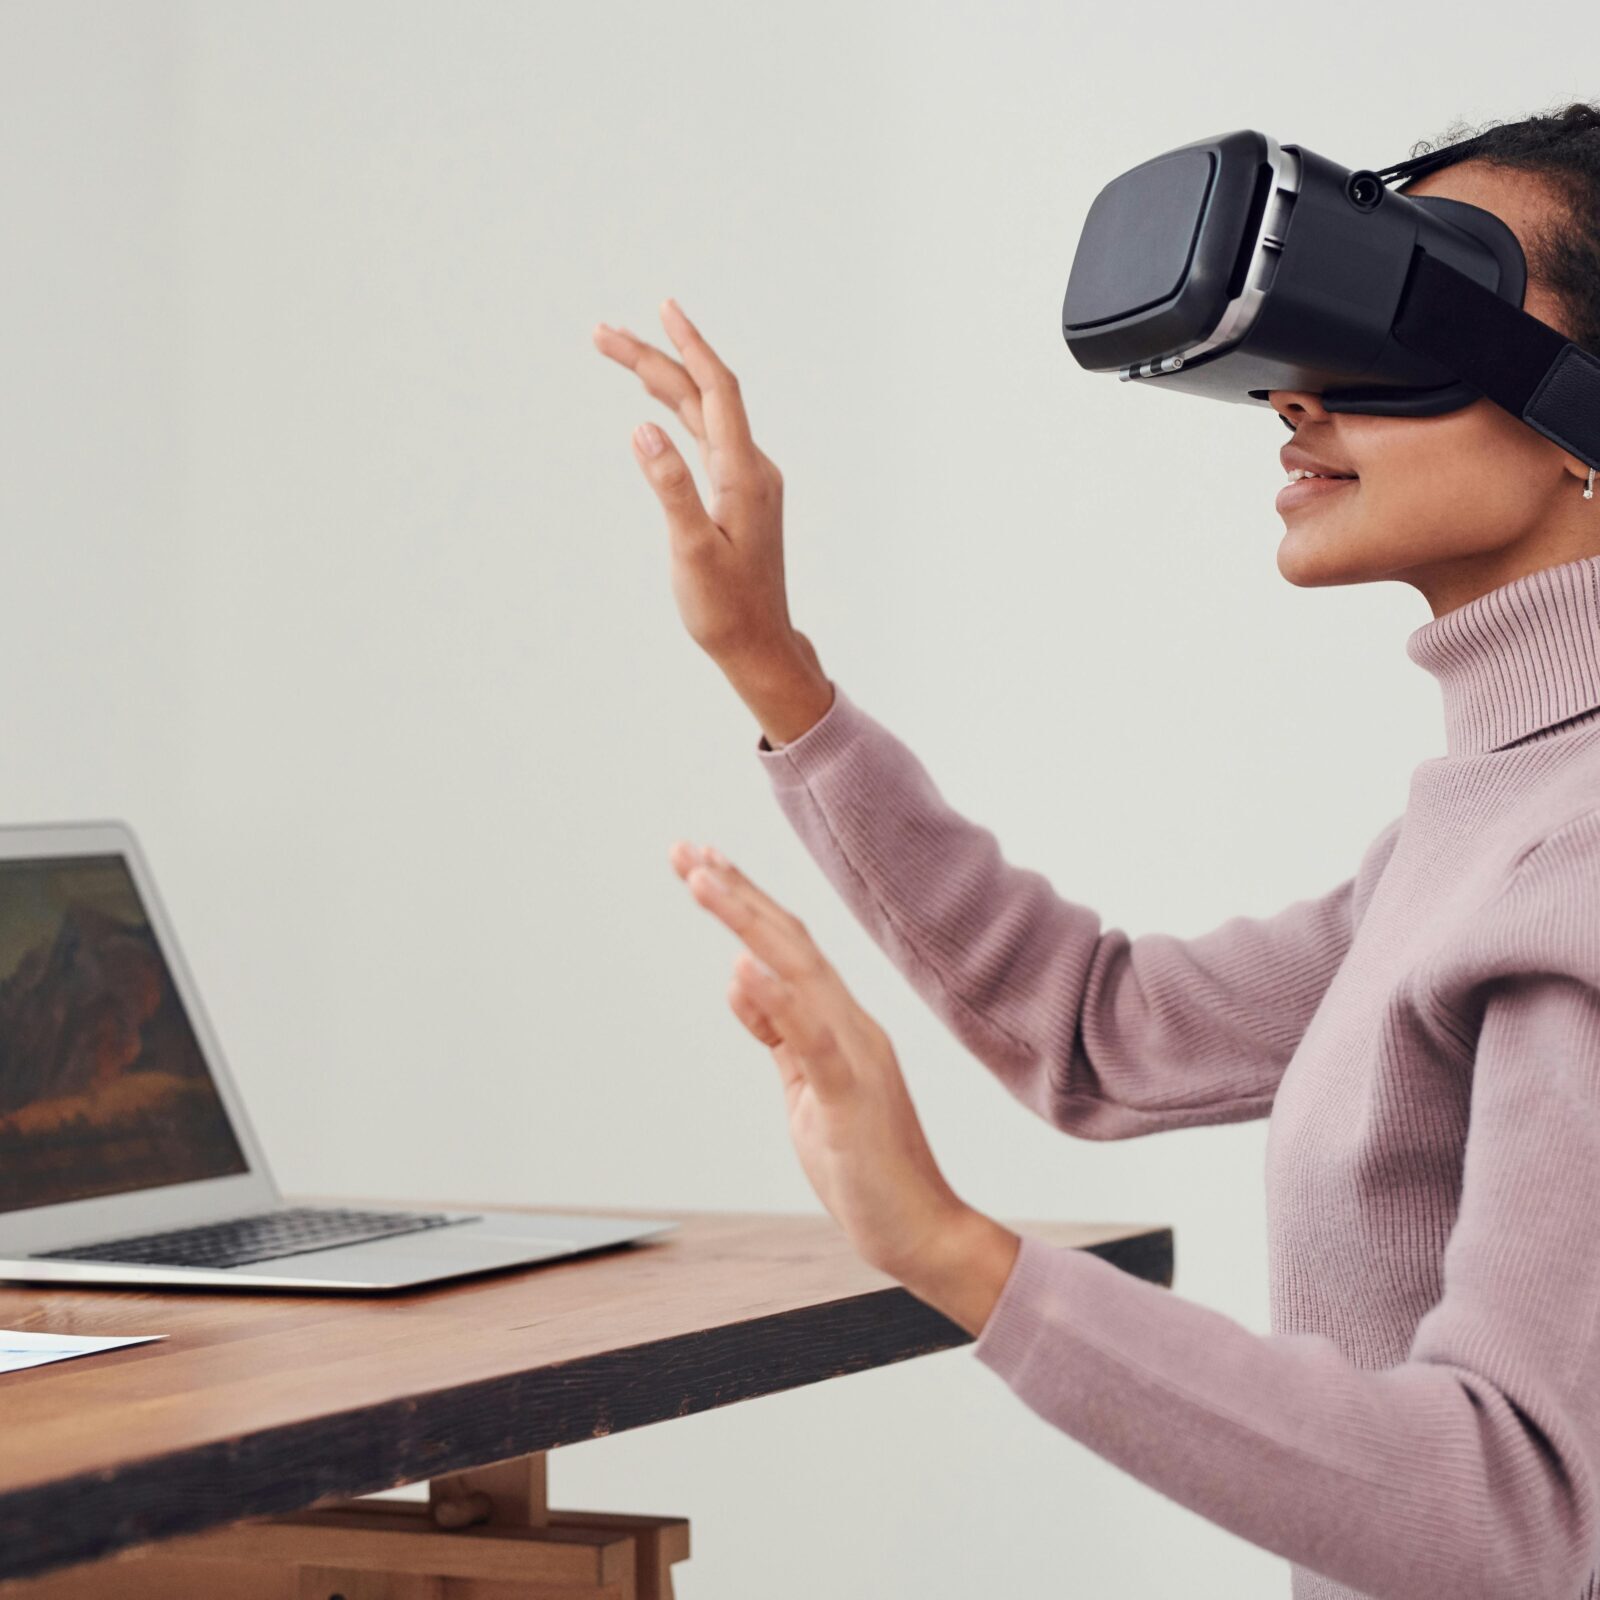 VR Headsets in the sales realm